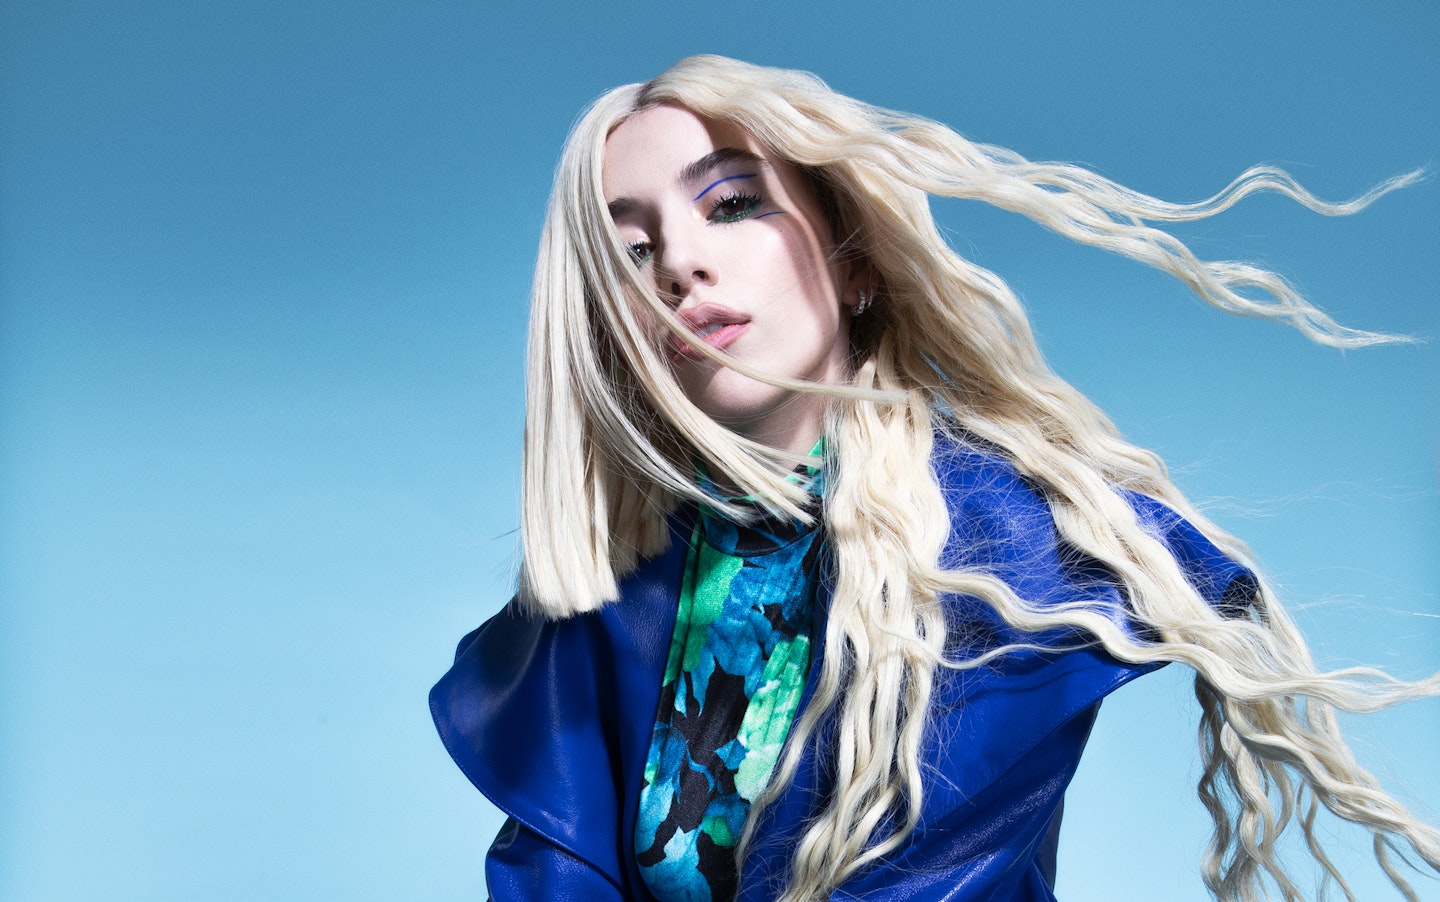 Kings & Queens - song and lyrics by Ava Max